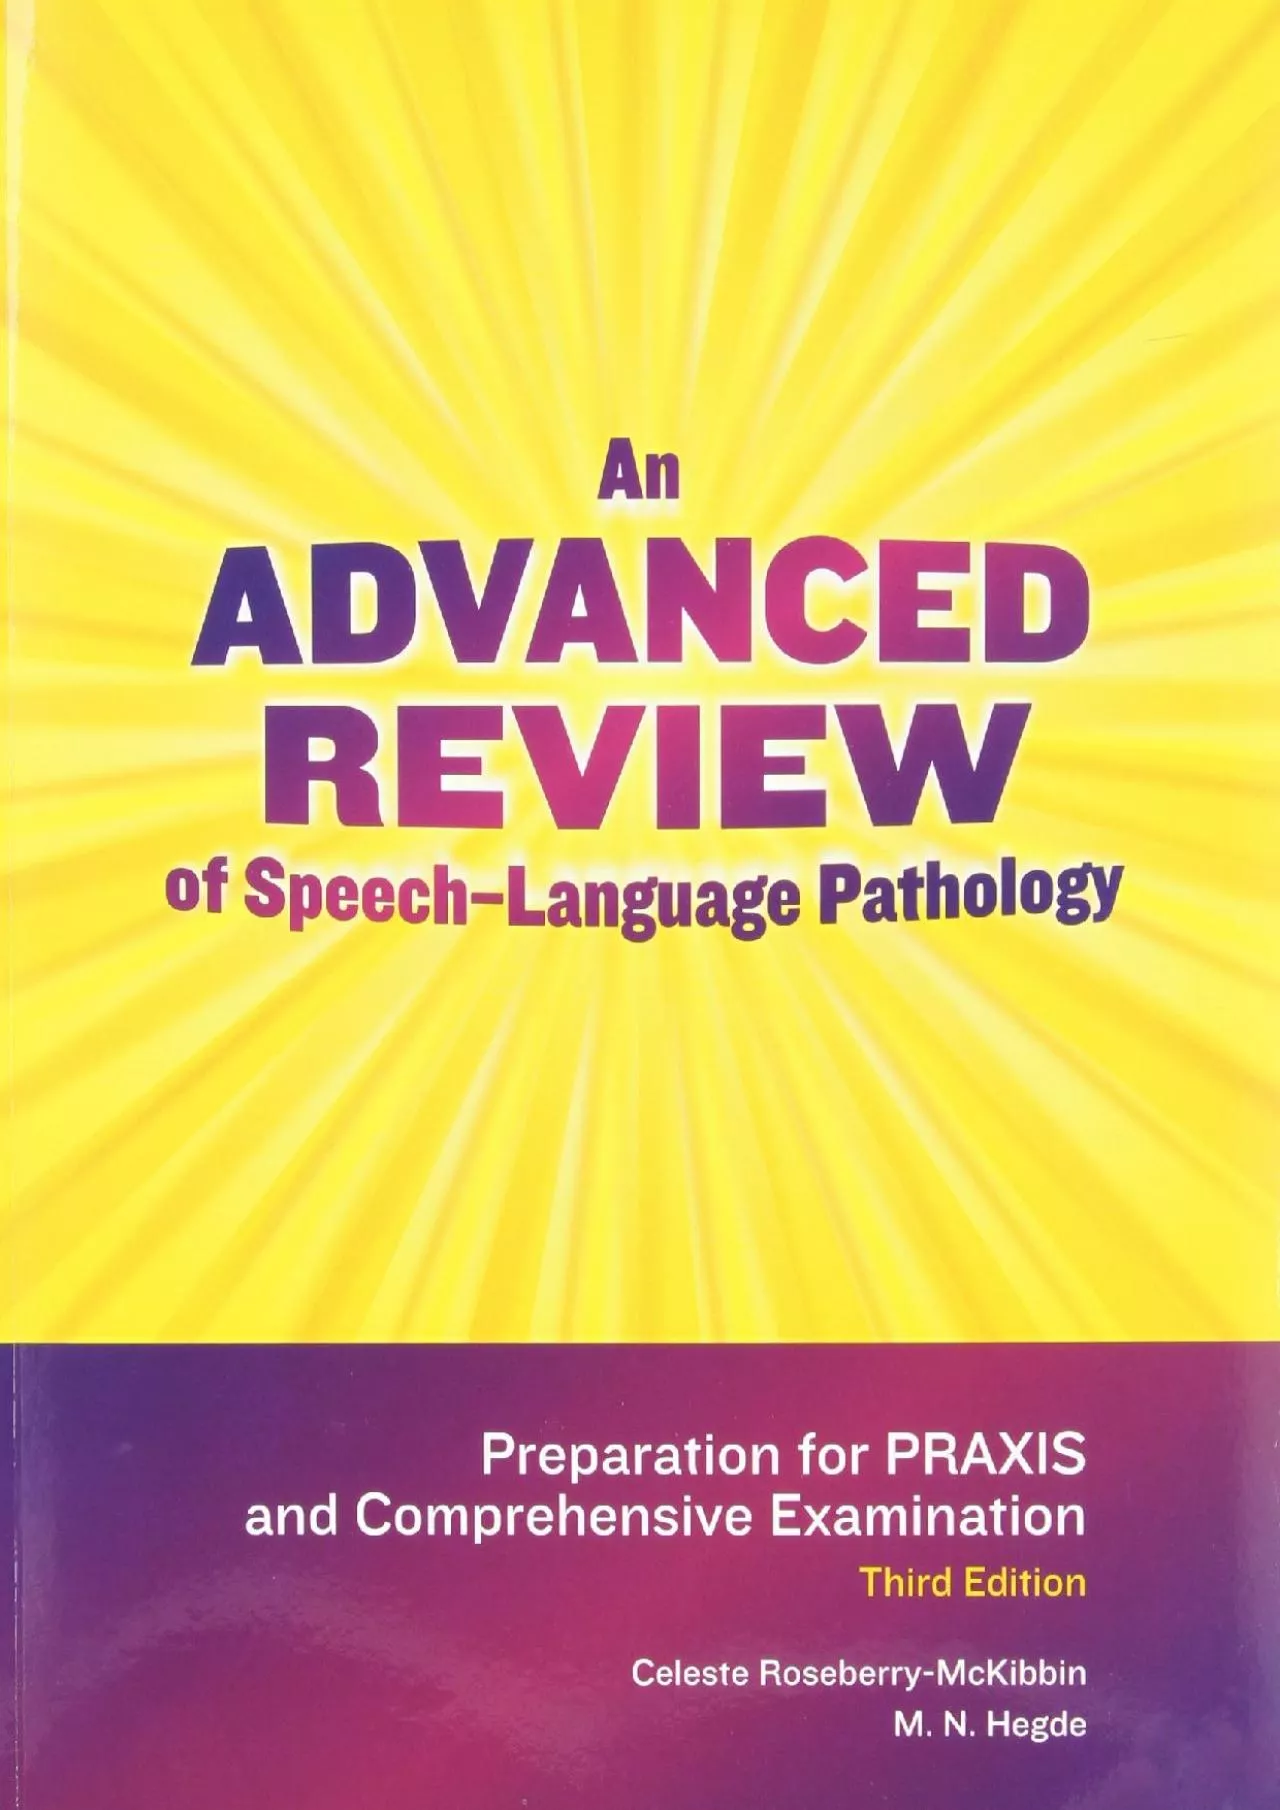 (DOWNLOAD)-An Advanced Review of Speech-Language Pathology: Preparation for Praxis and